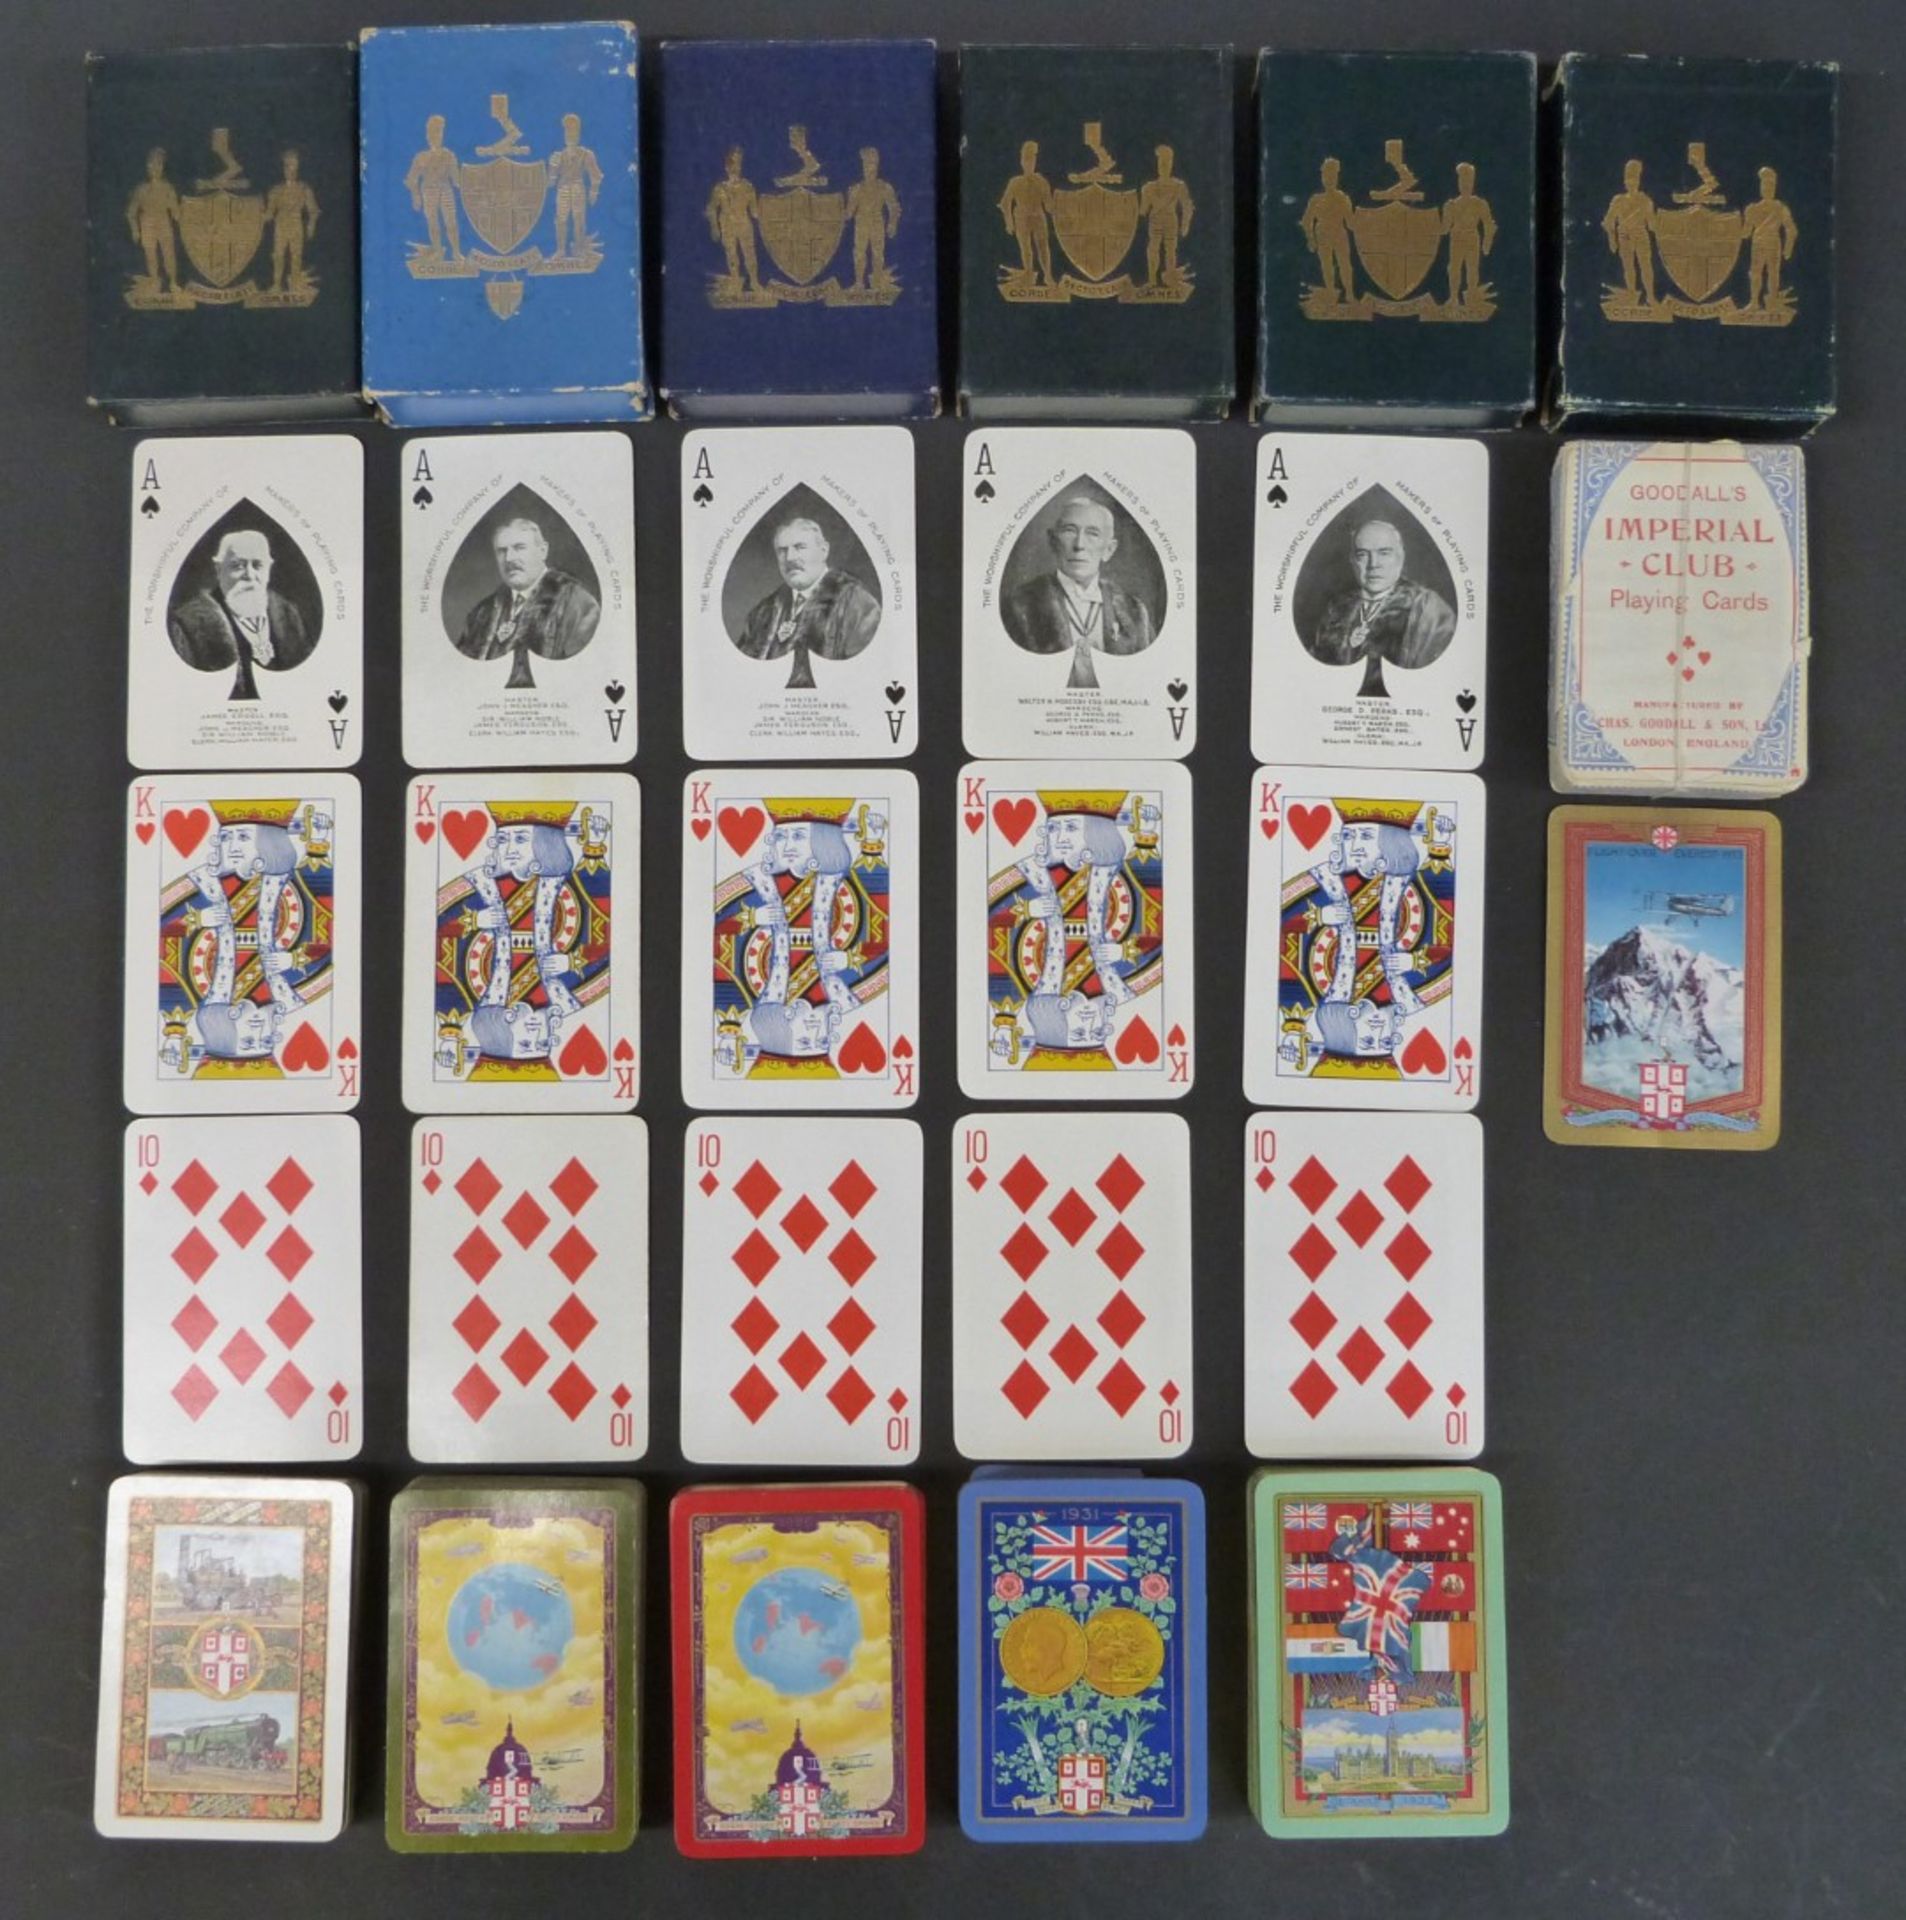 Five packs of Worshipful Company of Makers of Playing Cards playing cards, comprising 1925 centenary